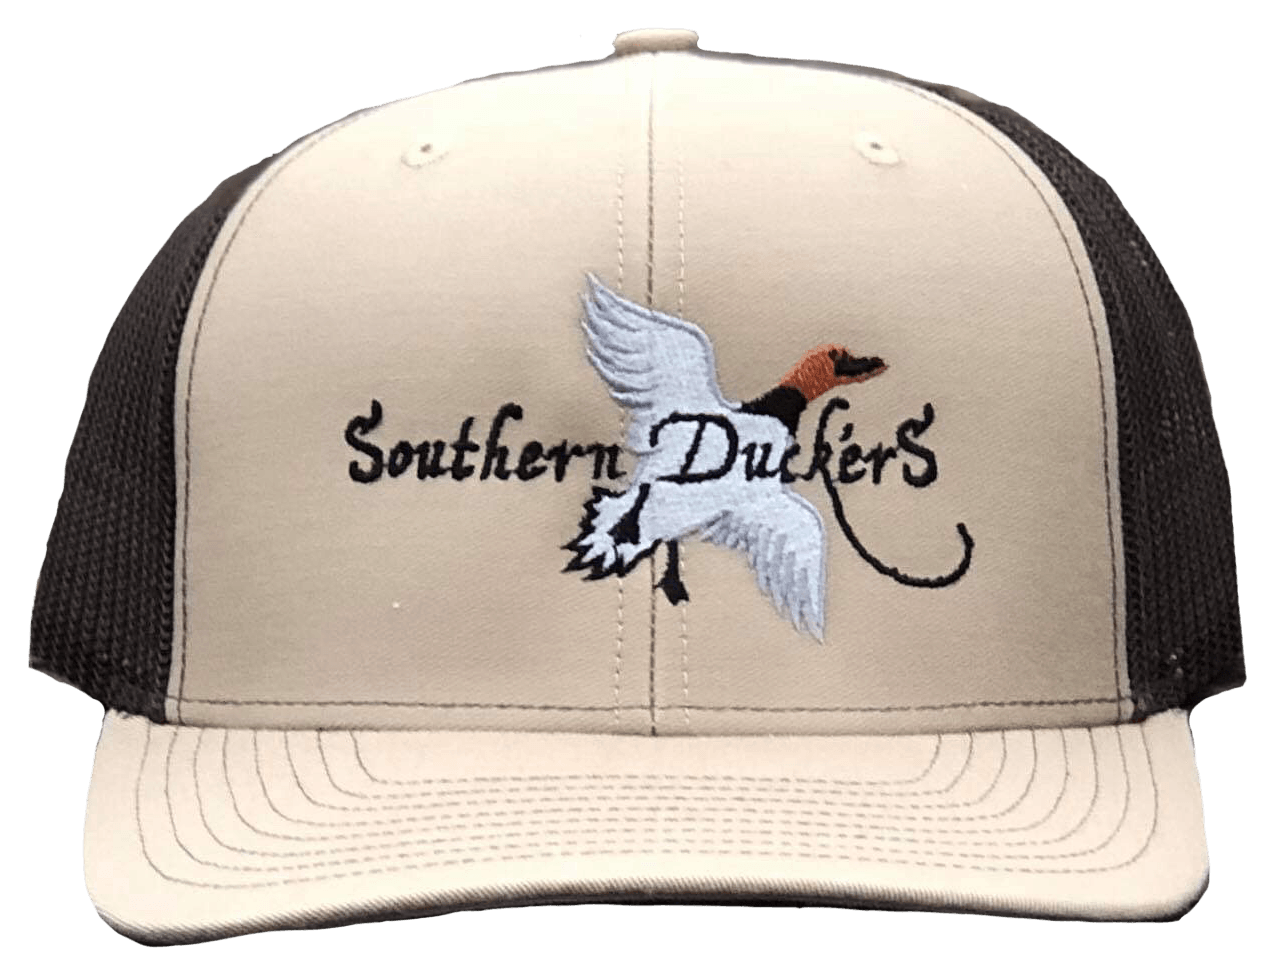 Southern Duckers Hats